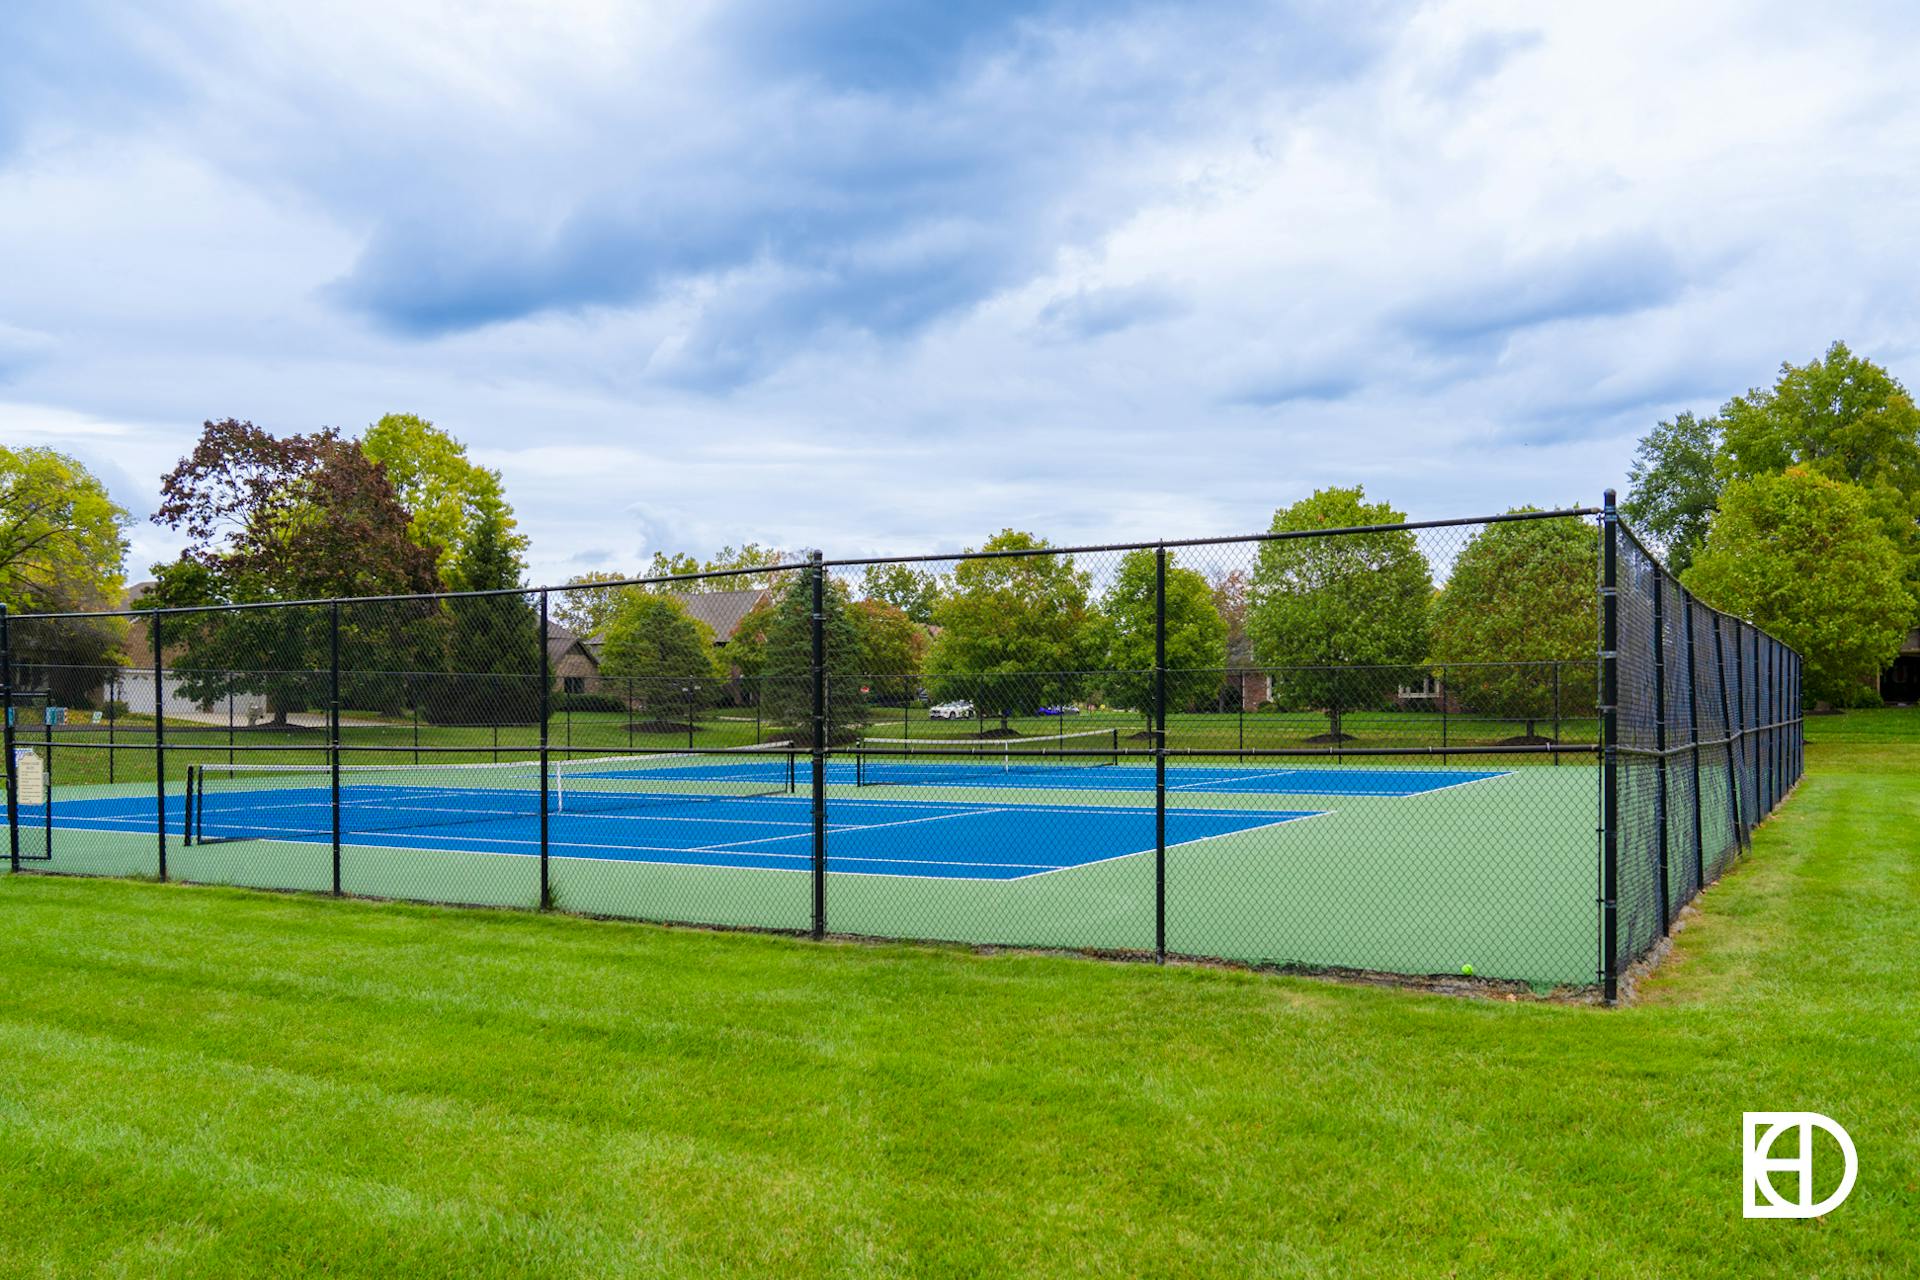 Photo of tennis courts in Stonegate neighborhood in Zionsville, Indiana.